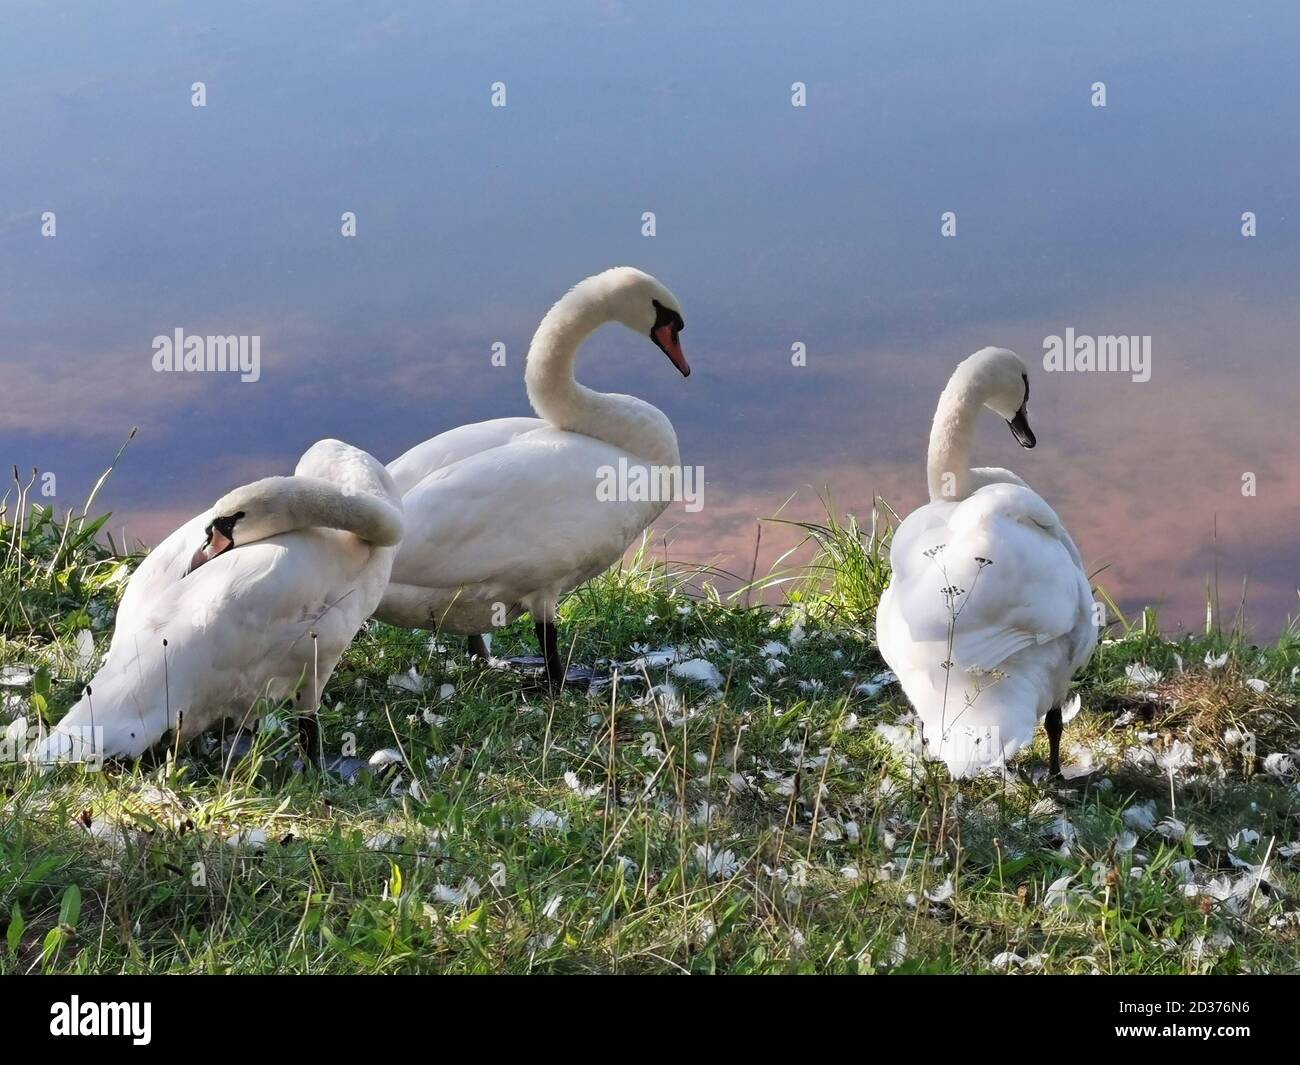 three swans standing at the edge of a lake or pond in front of blue and pink water Stock Photo